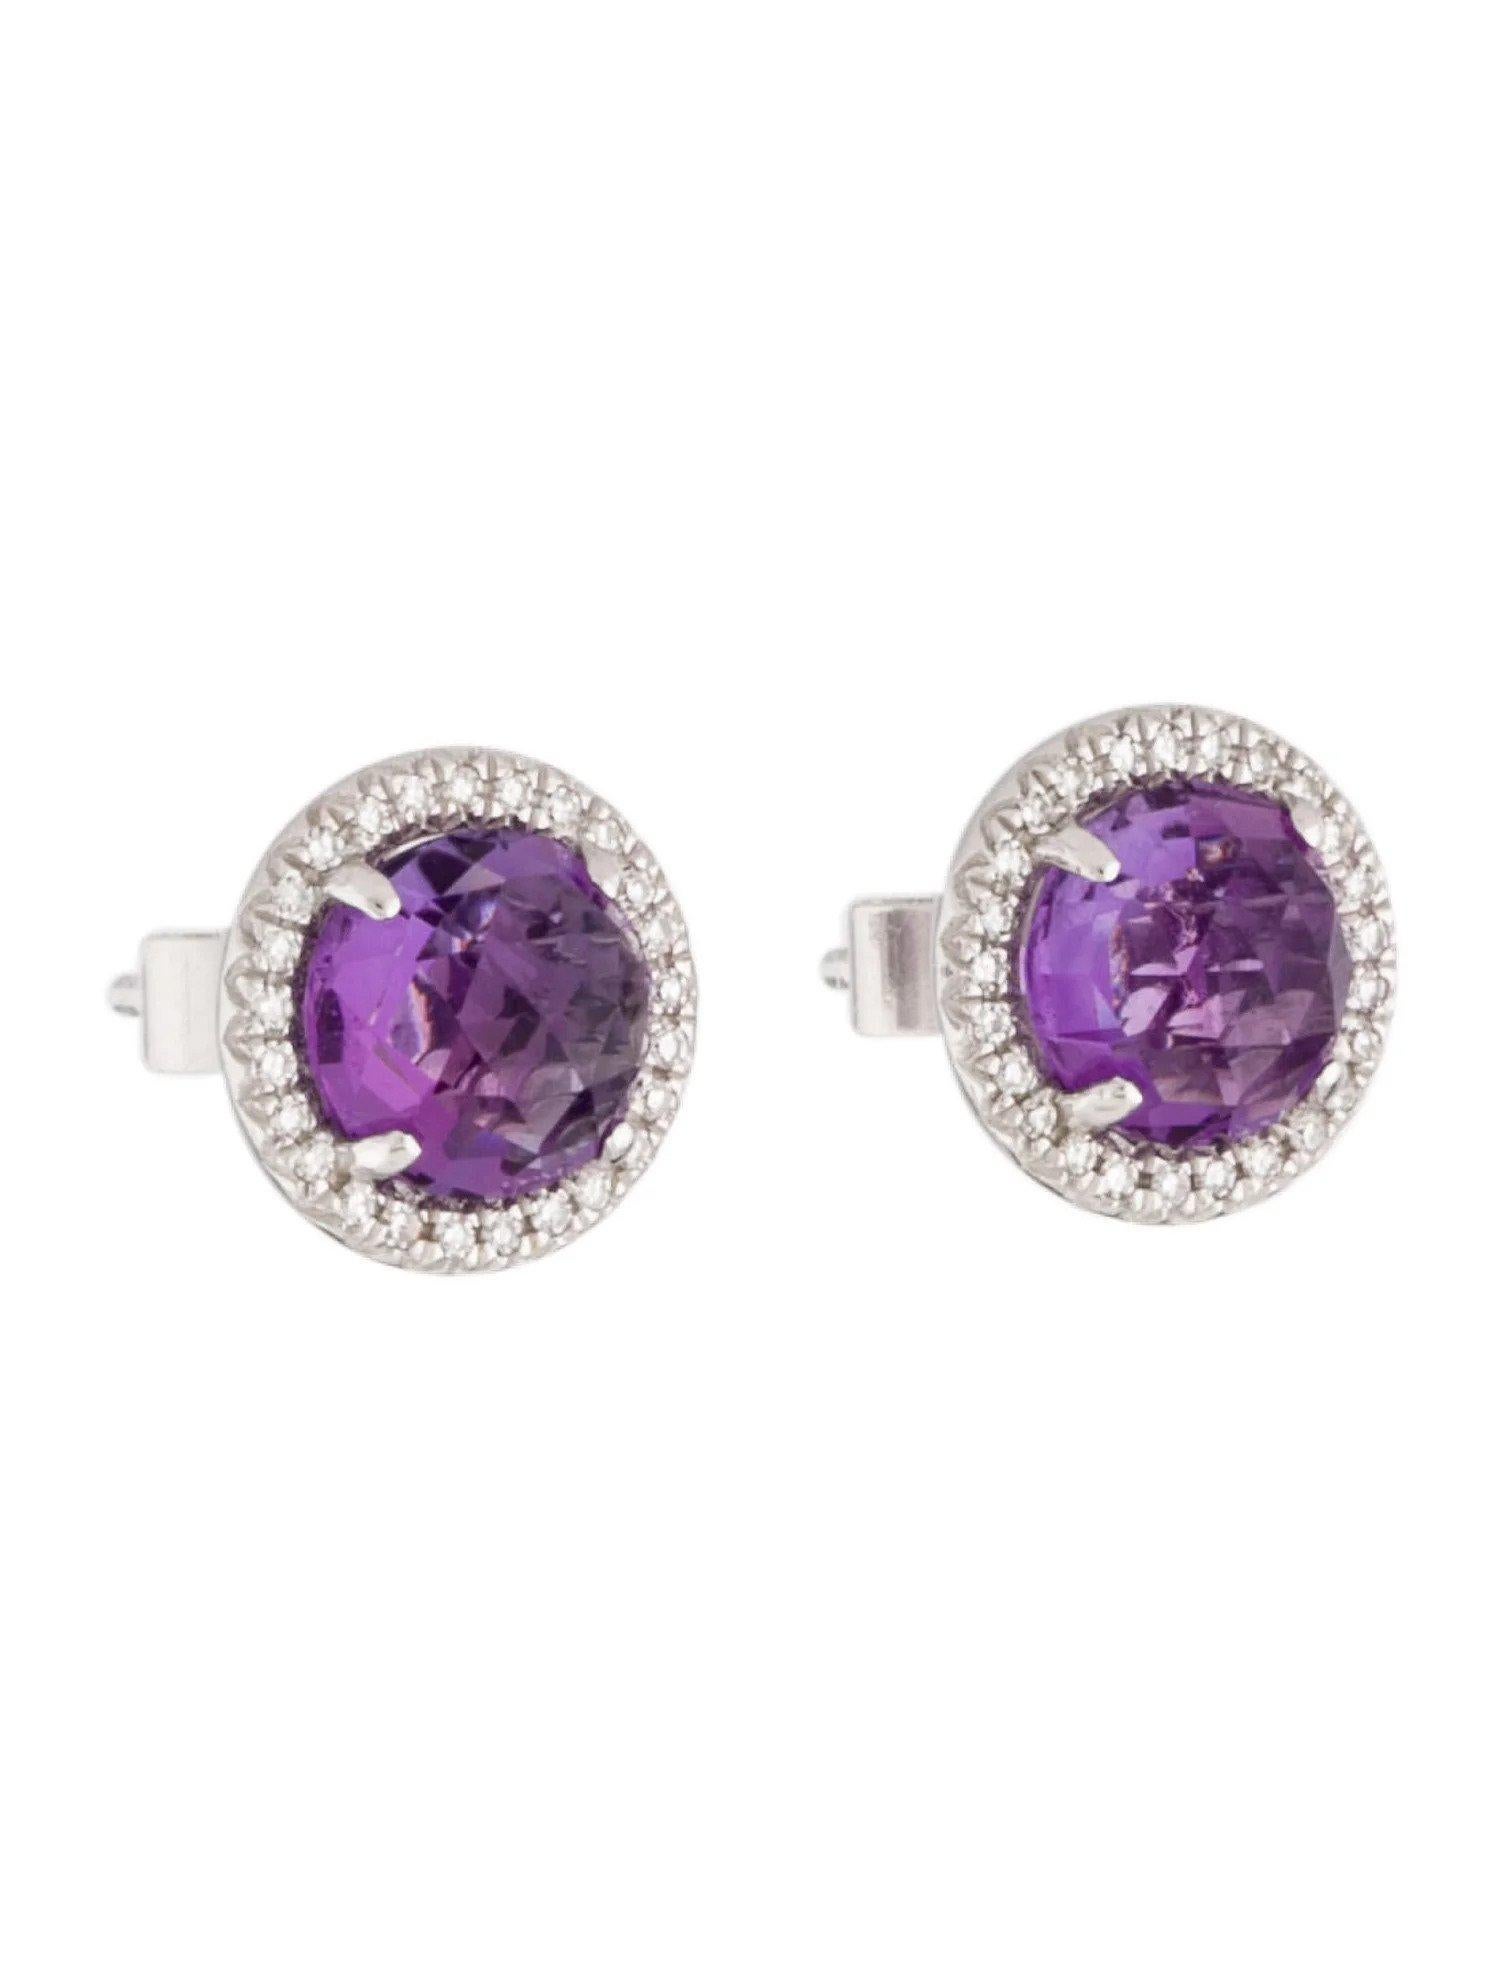 Round Cut 1.86 Carat Round Amethyst & Diamond White Gold Stud Earrings For Sale